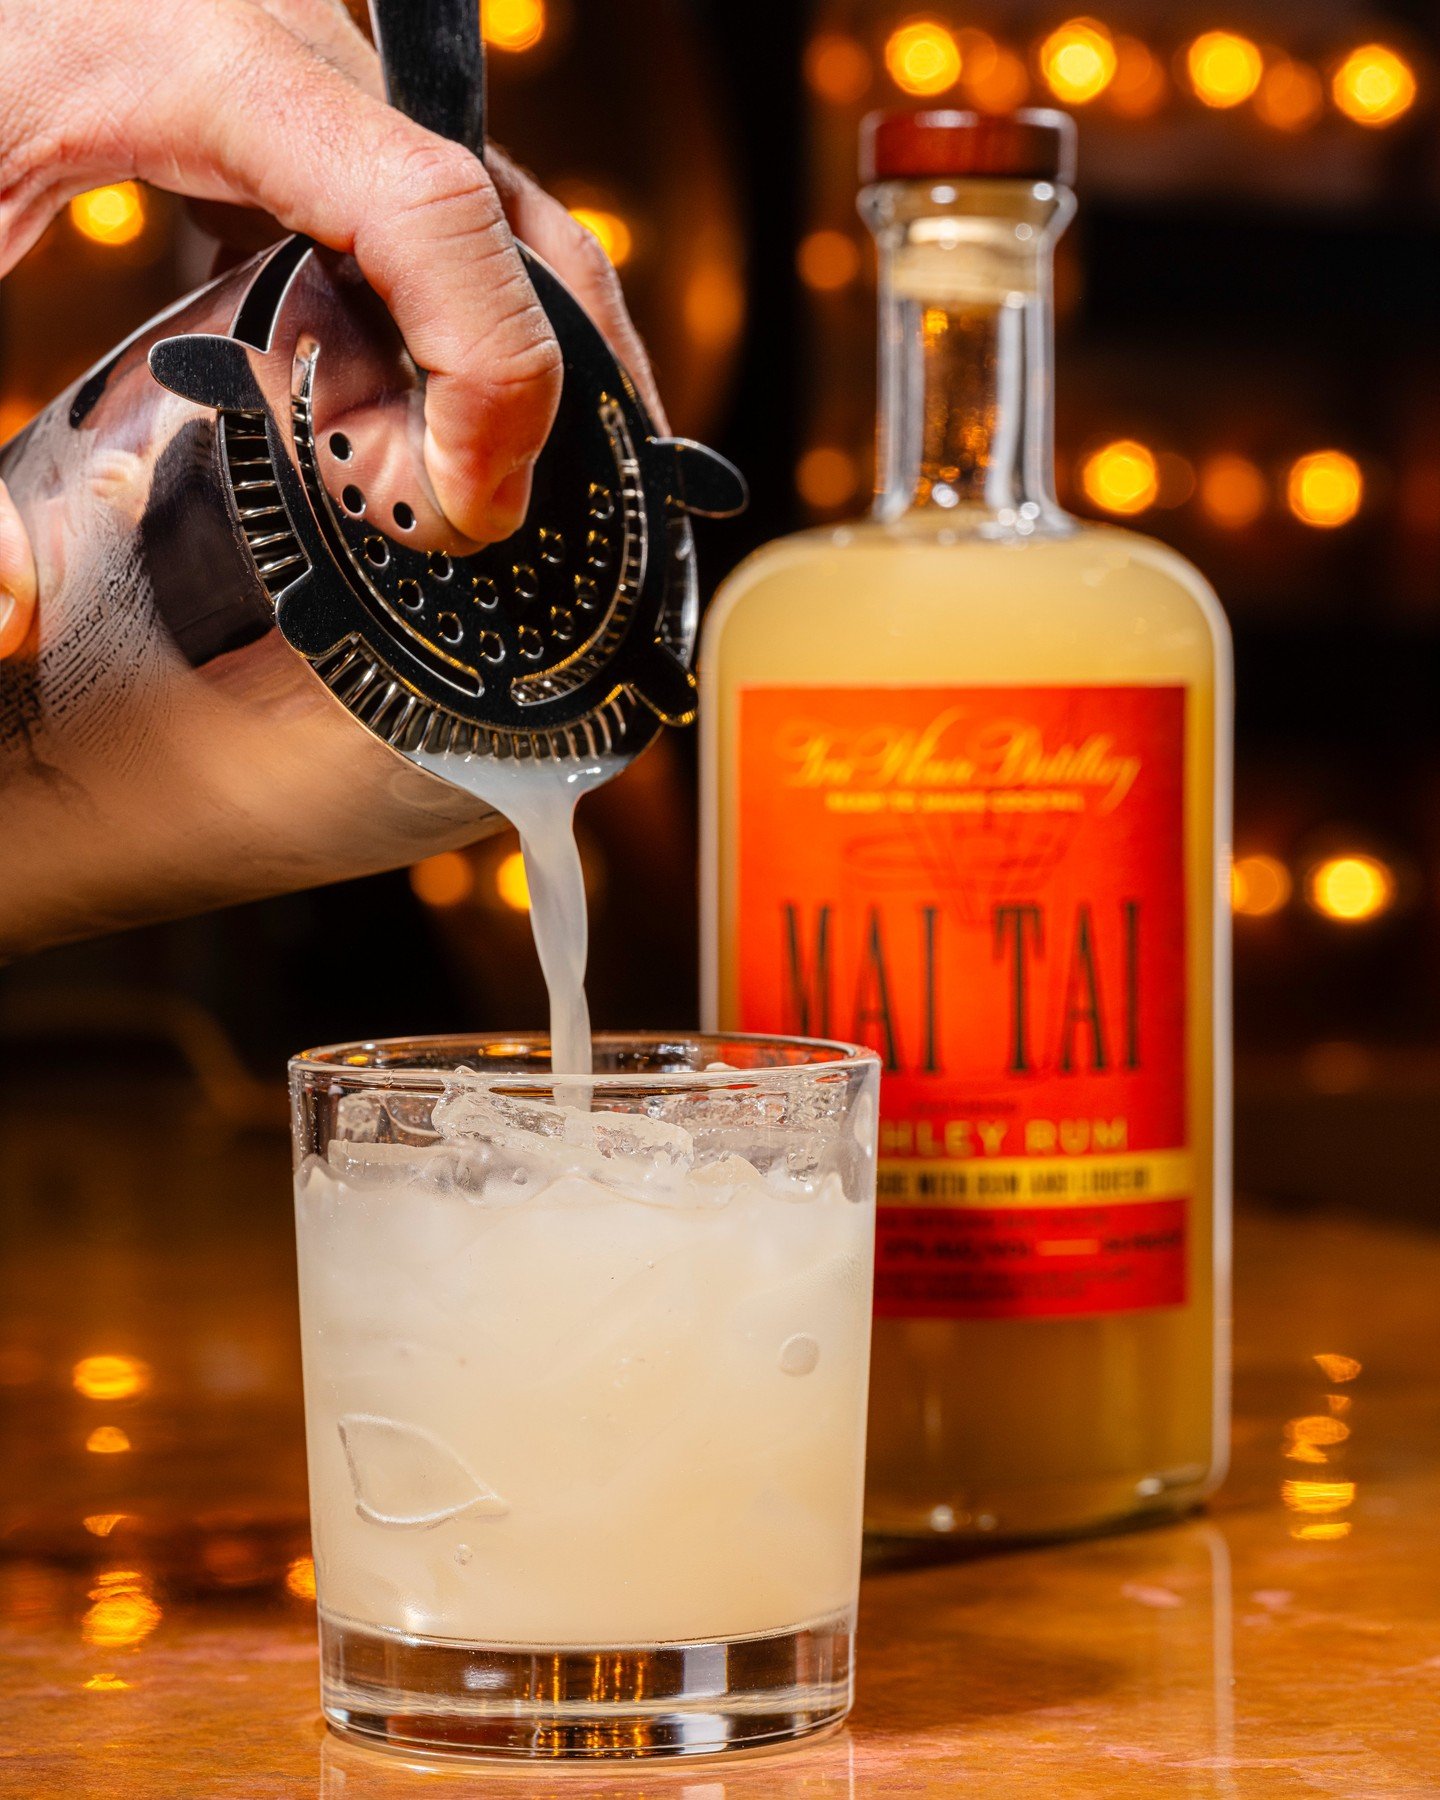 A fresh run of Mai Tai is hitting our Ready to Shake bottles in both 750 ML and 200 ML format for your spring drinking pleasure.

Made from scratch in-House, this gem is a best seller for a reason: It's absolutely delicious. 

#productphotography #ph